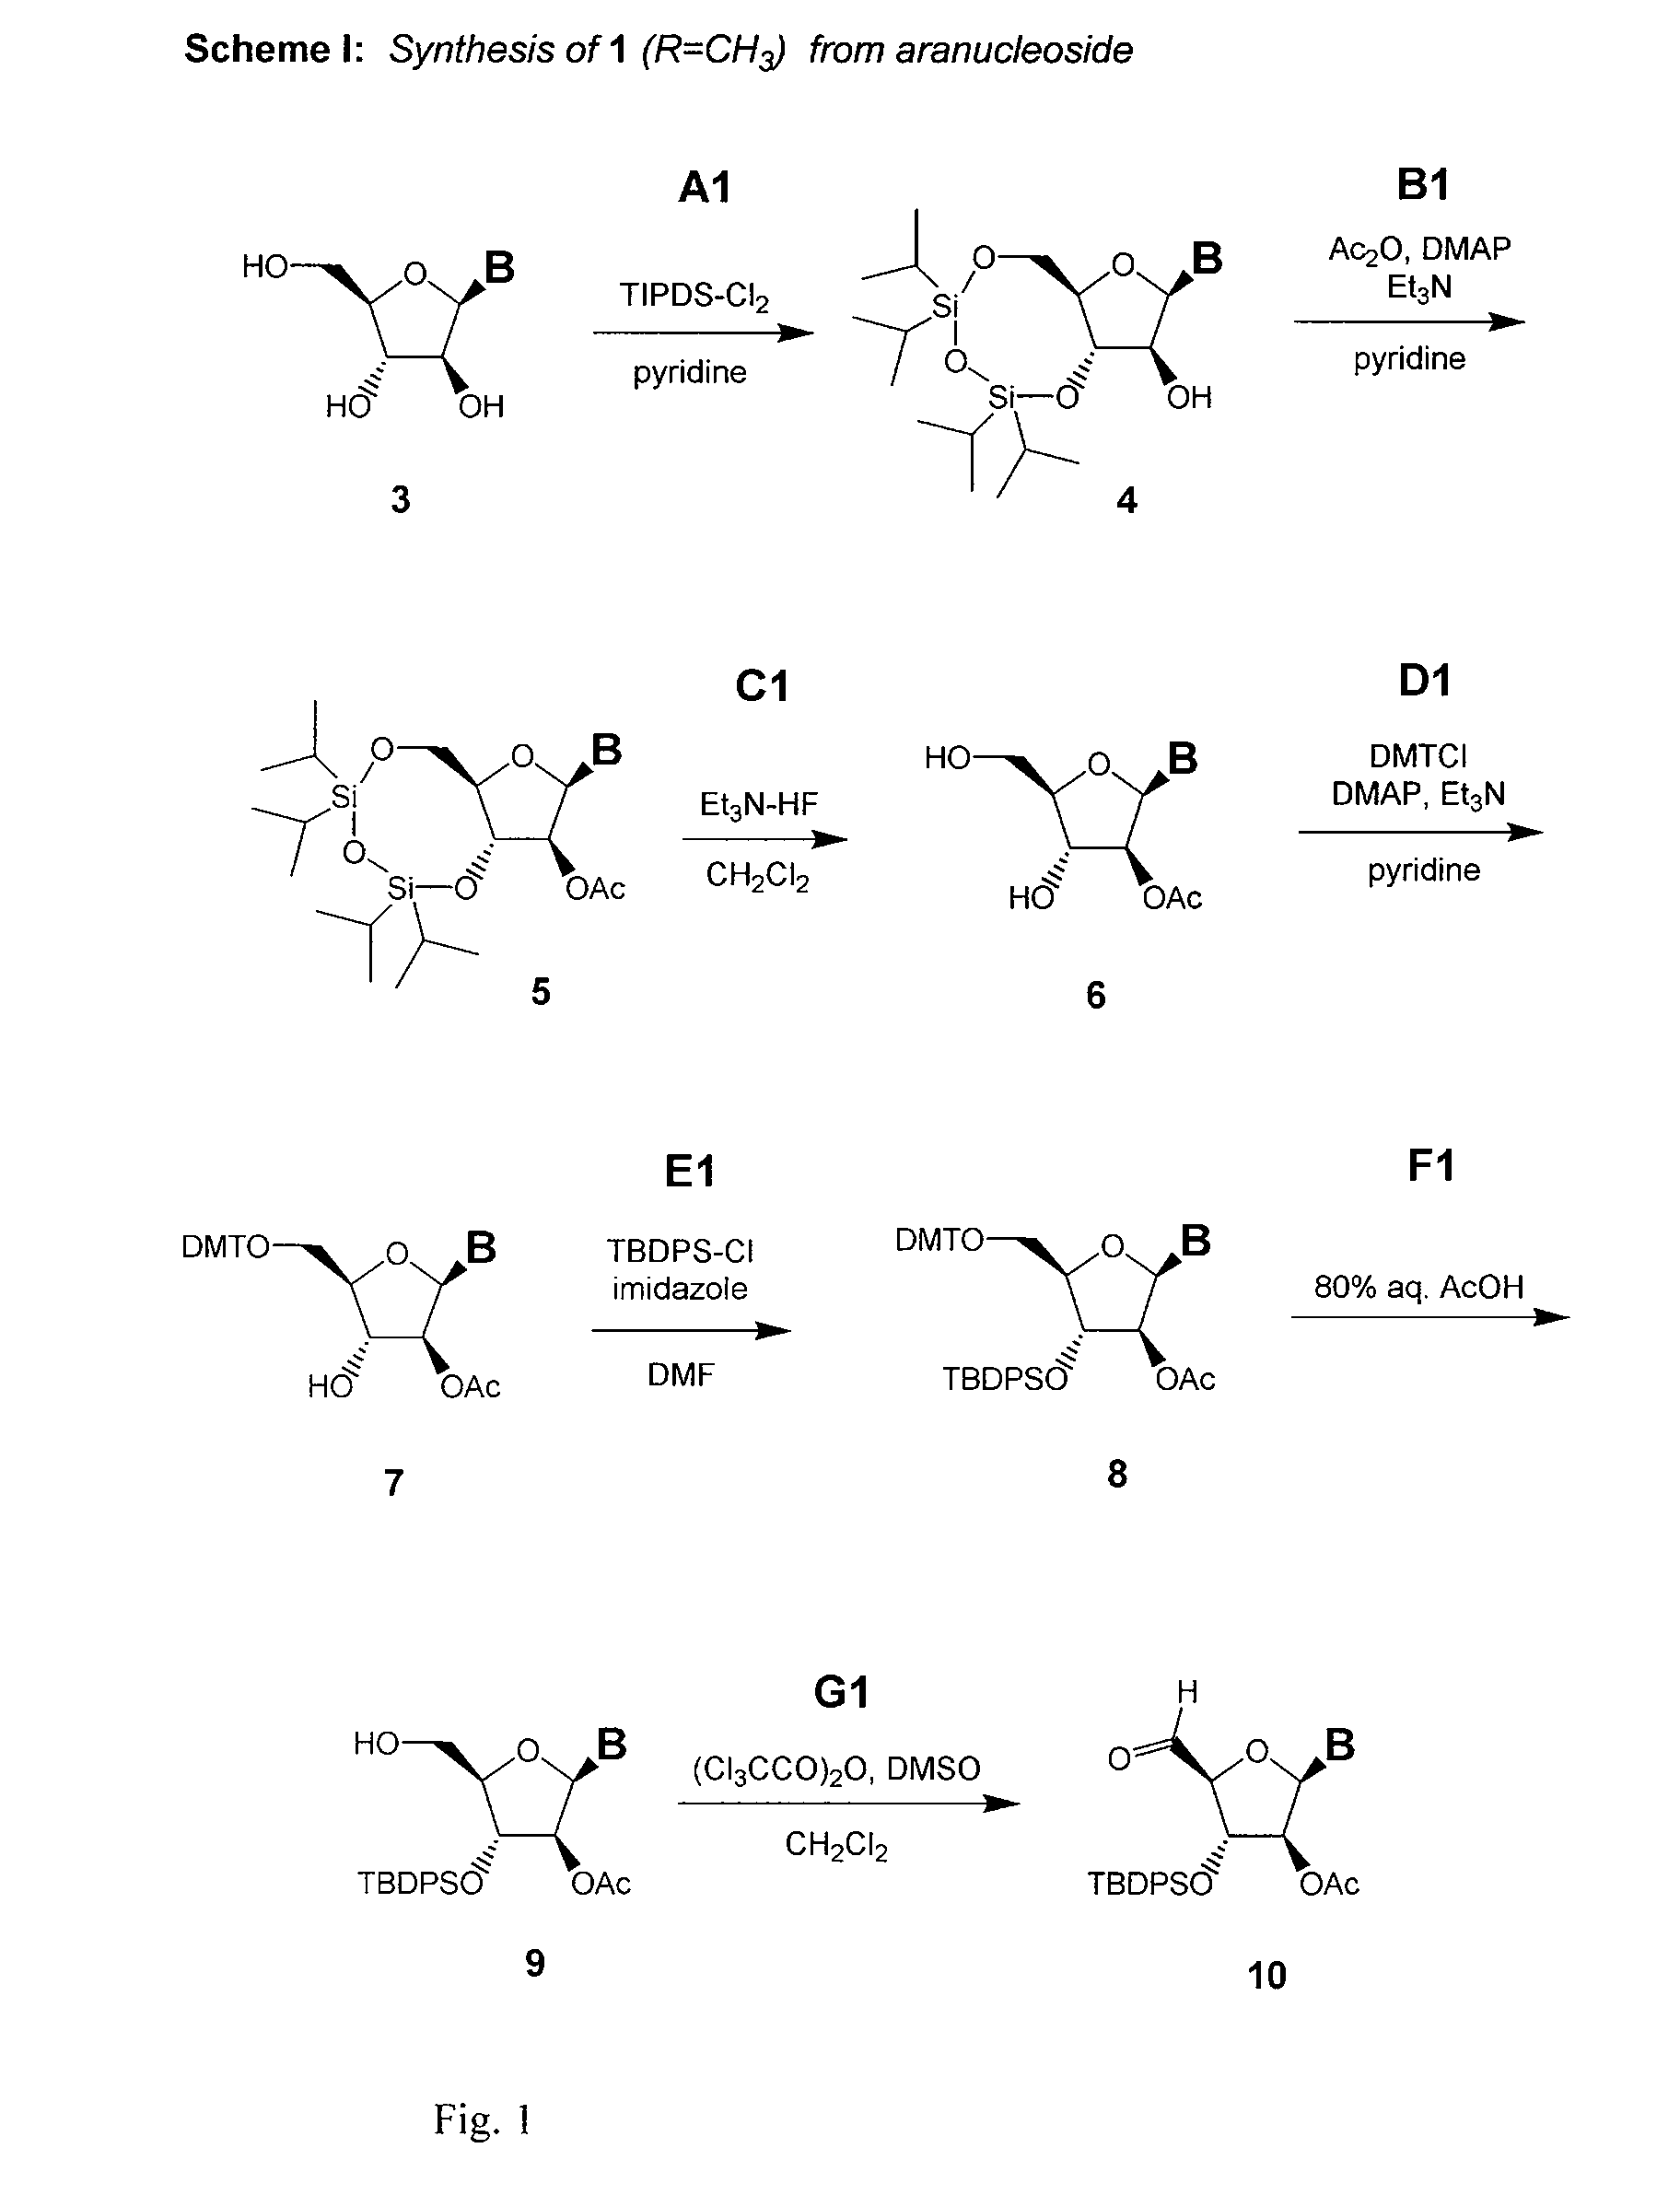 Polycyclic sugar surrogate-containing oligomeric compounds and compositions for use in gene modulation